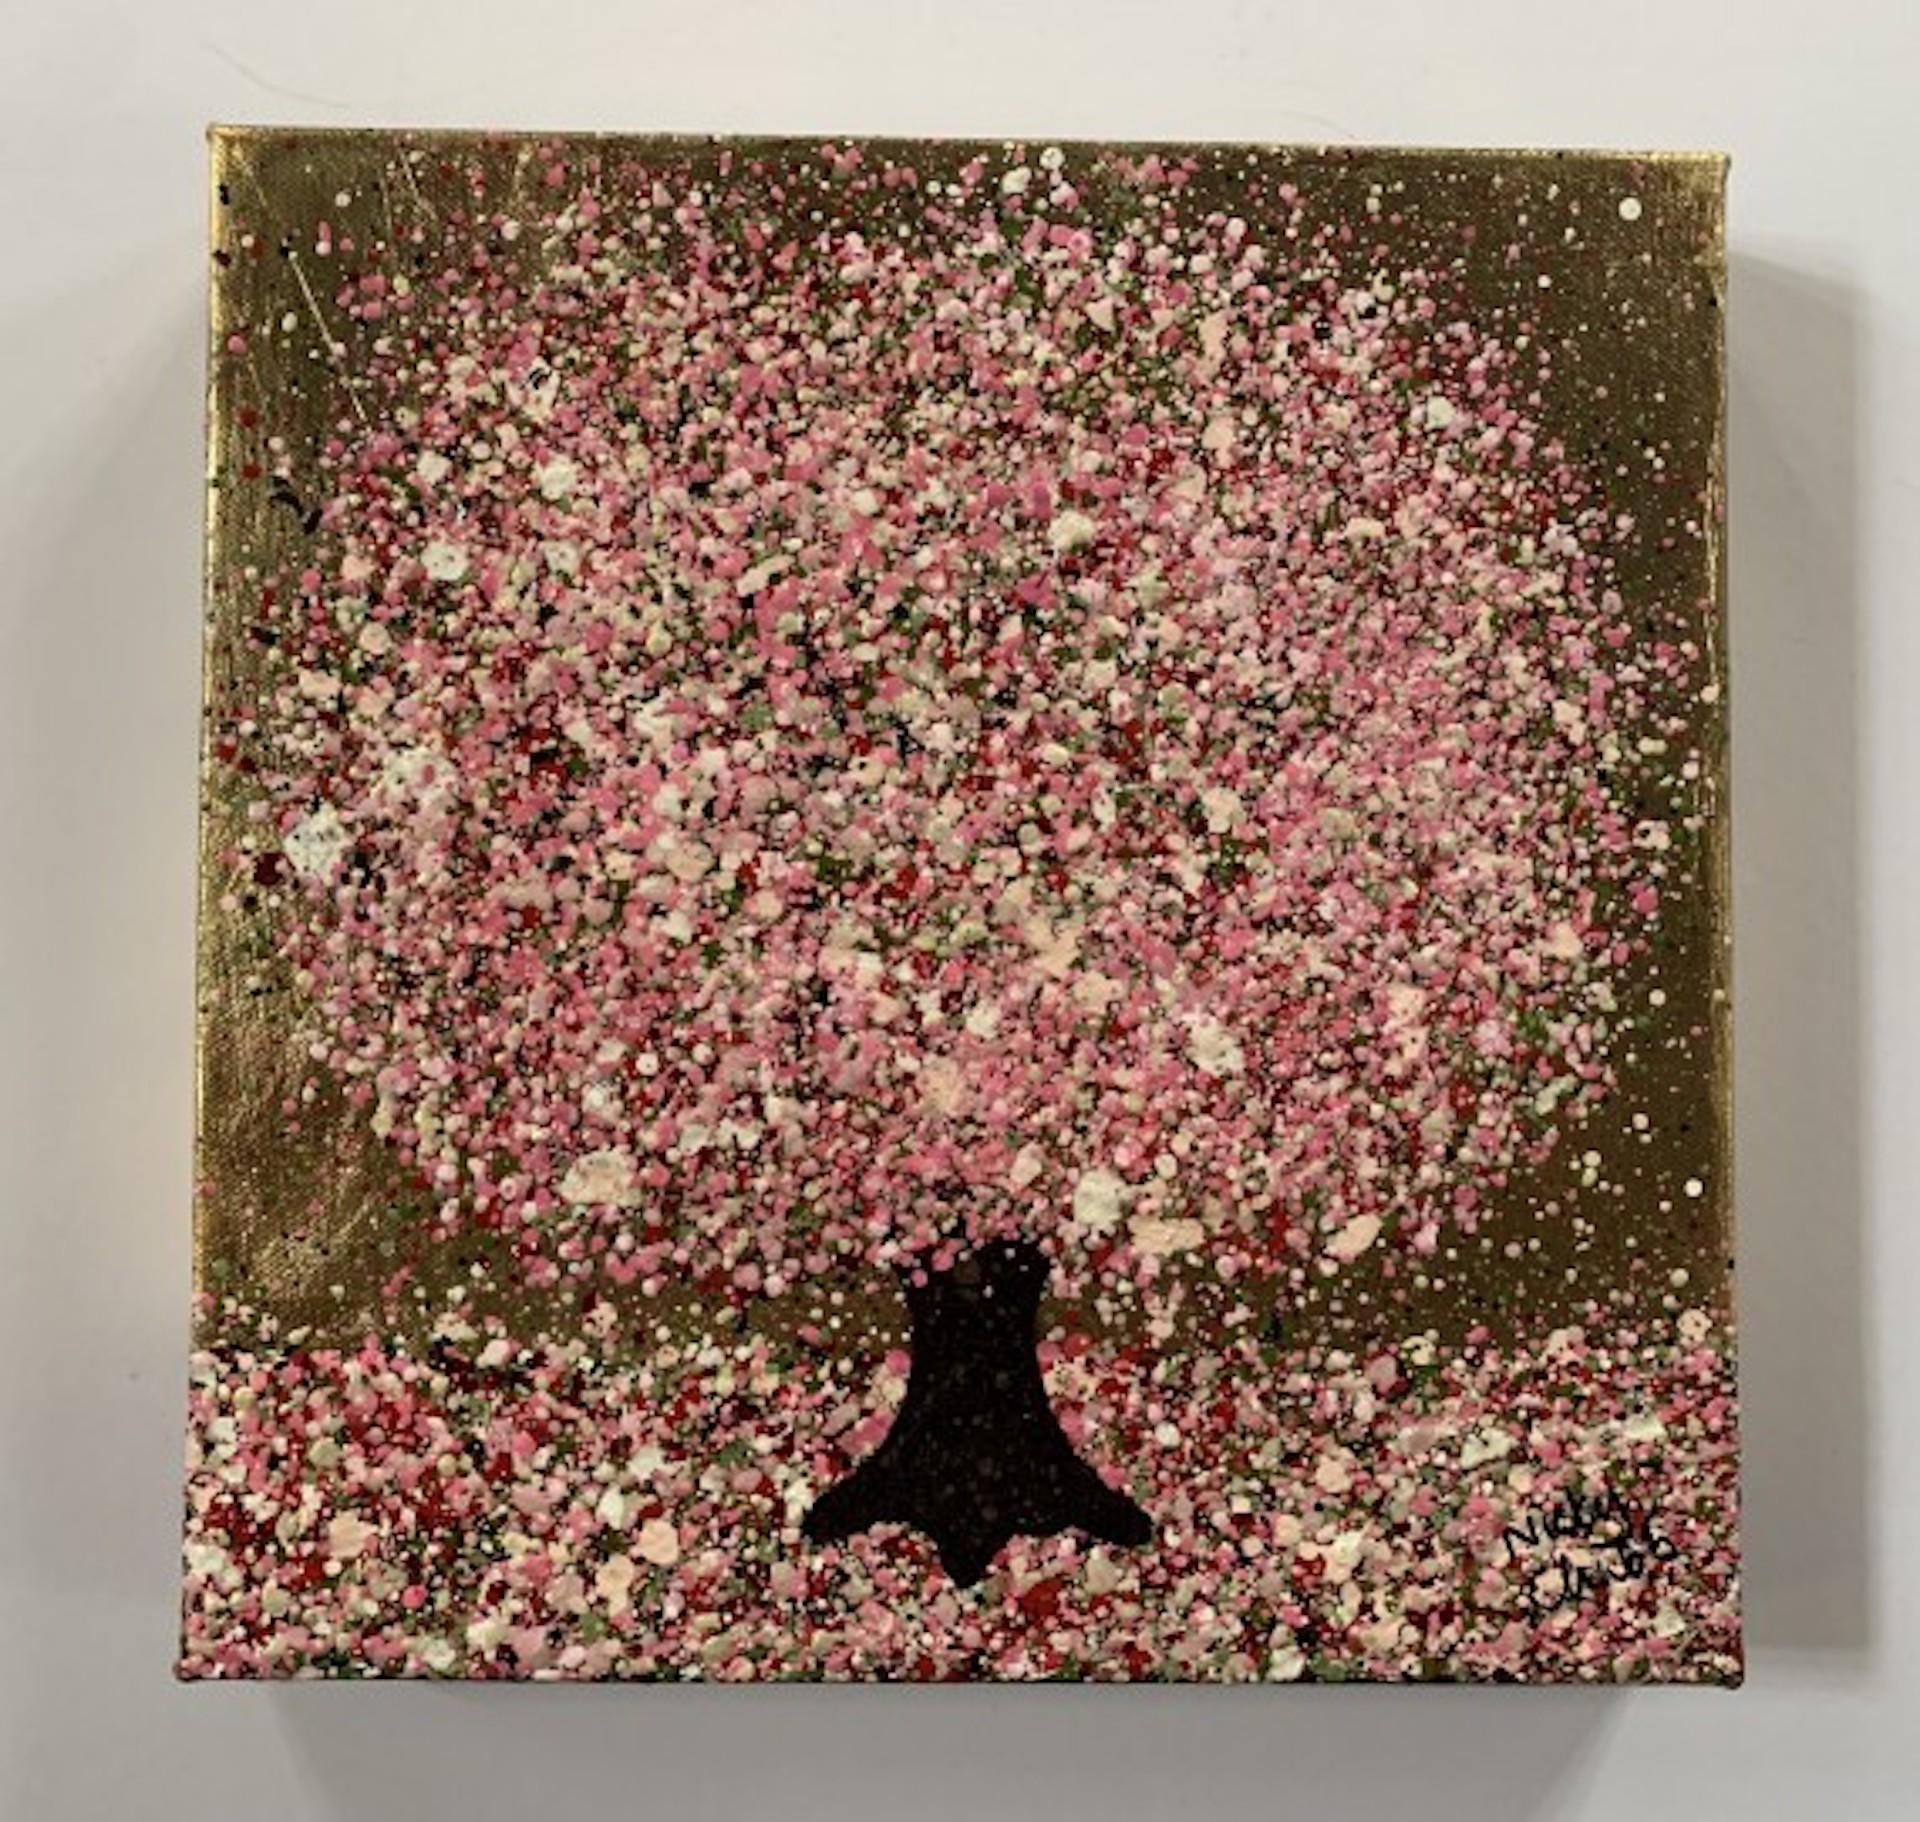 Wonderful Cherry Blossom by Nicky Chubb [2021]
Original
Acrylic Paint on Canvas
Image size: H:30 cm x W:30 cm
Complete Size of Unframed Work: H:30 cm x W:30 cm x D:4cm
Sold Unframed
Please note that insitu images are purely an indication of how a